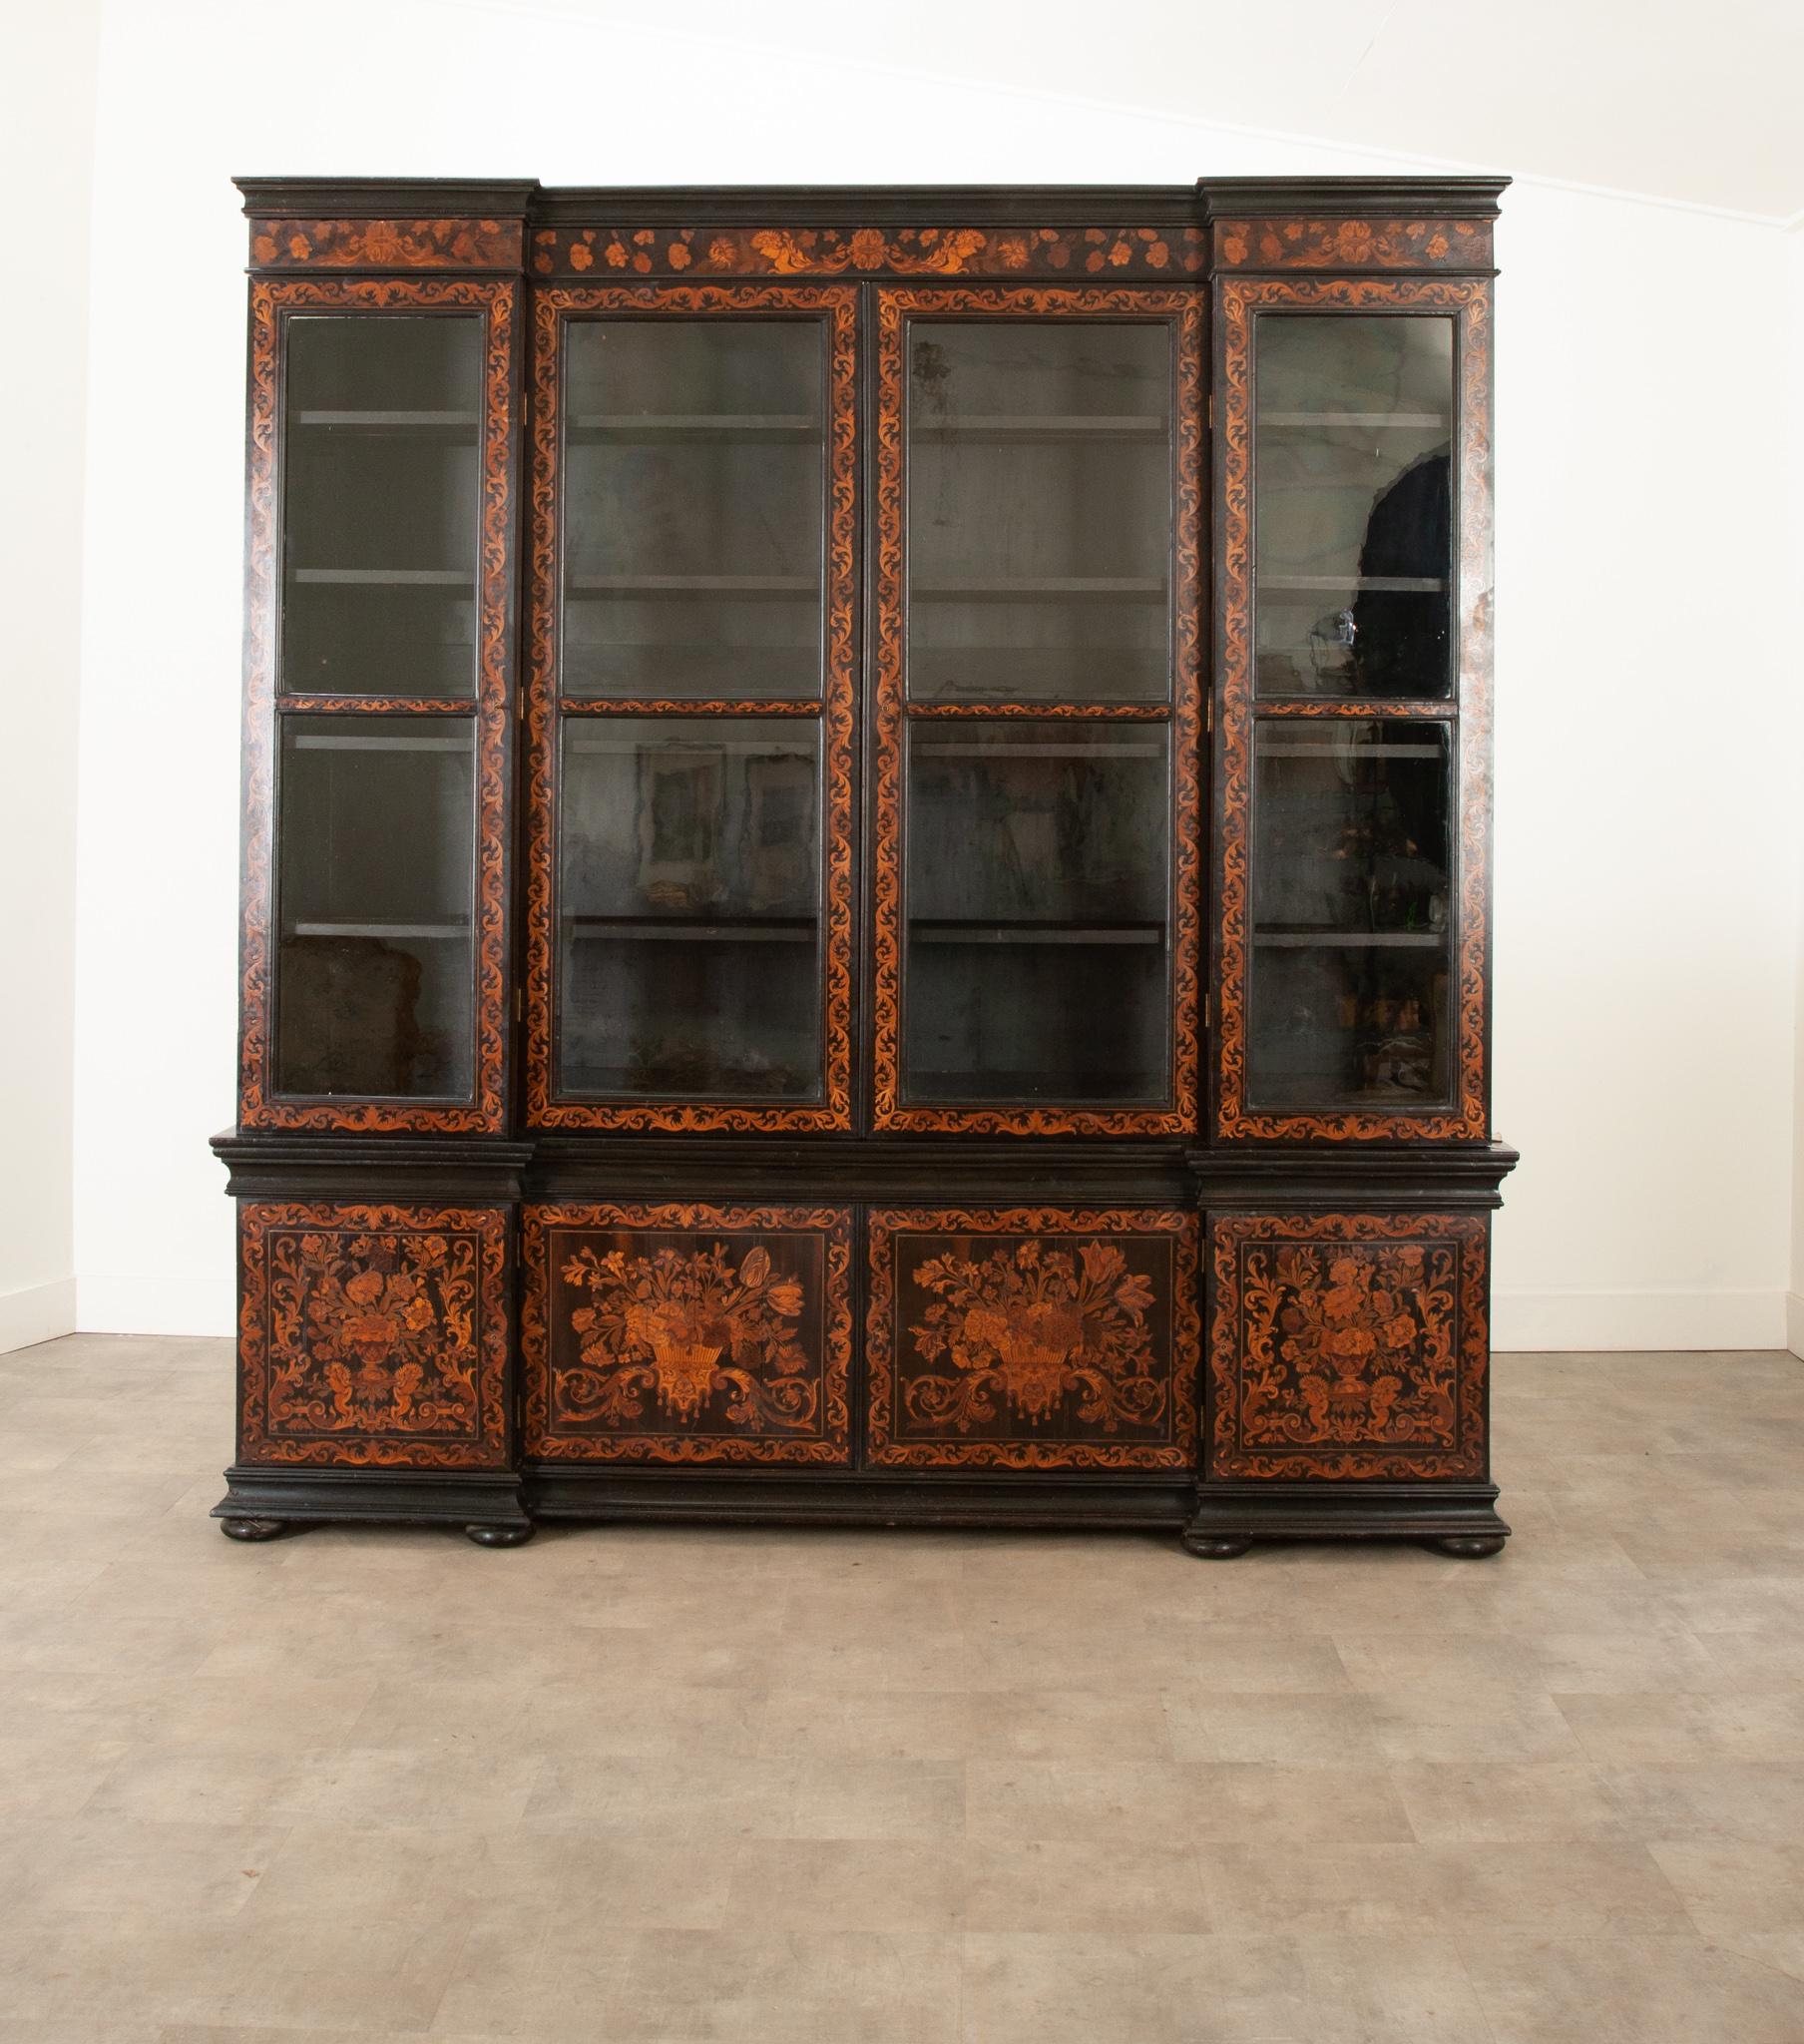 A breathtaking hand carved ebony cabinet with over the top marquetry designs! Built in the 1790’s this rare and fine breakfront bookcase is in outstanding antique condition. All the doors display hand rolled glass panes sounded in detailed inlay.